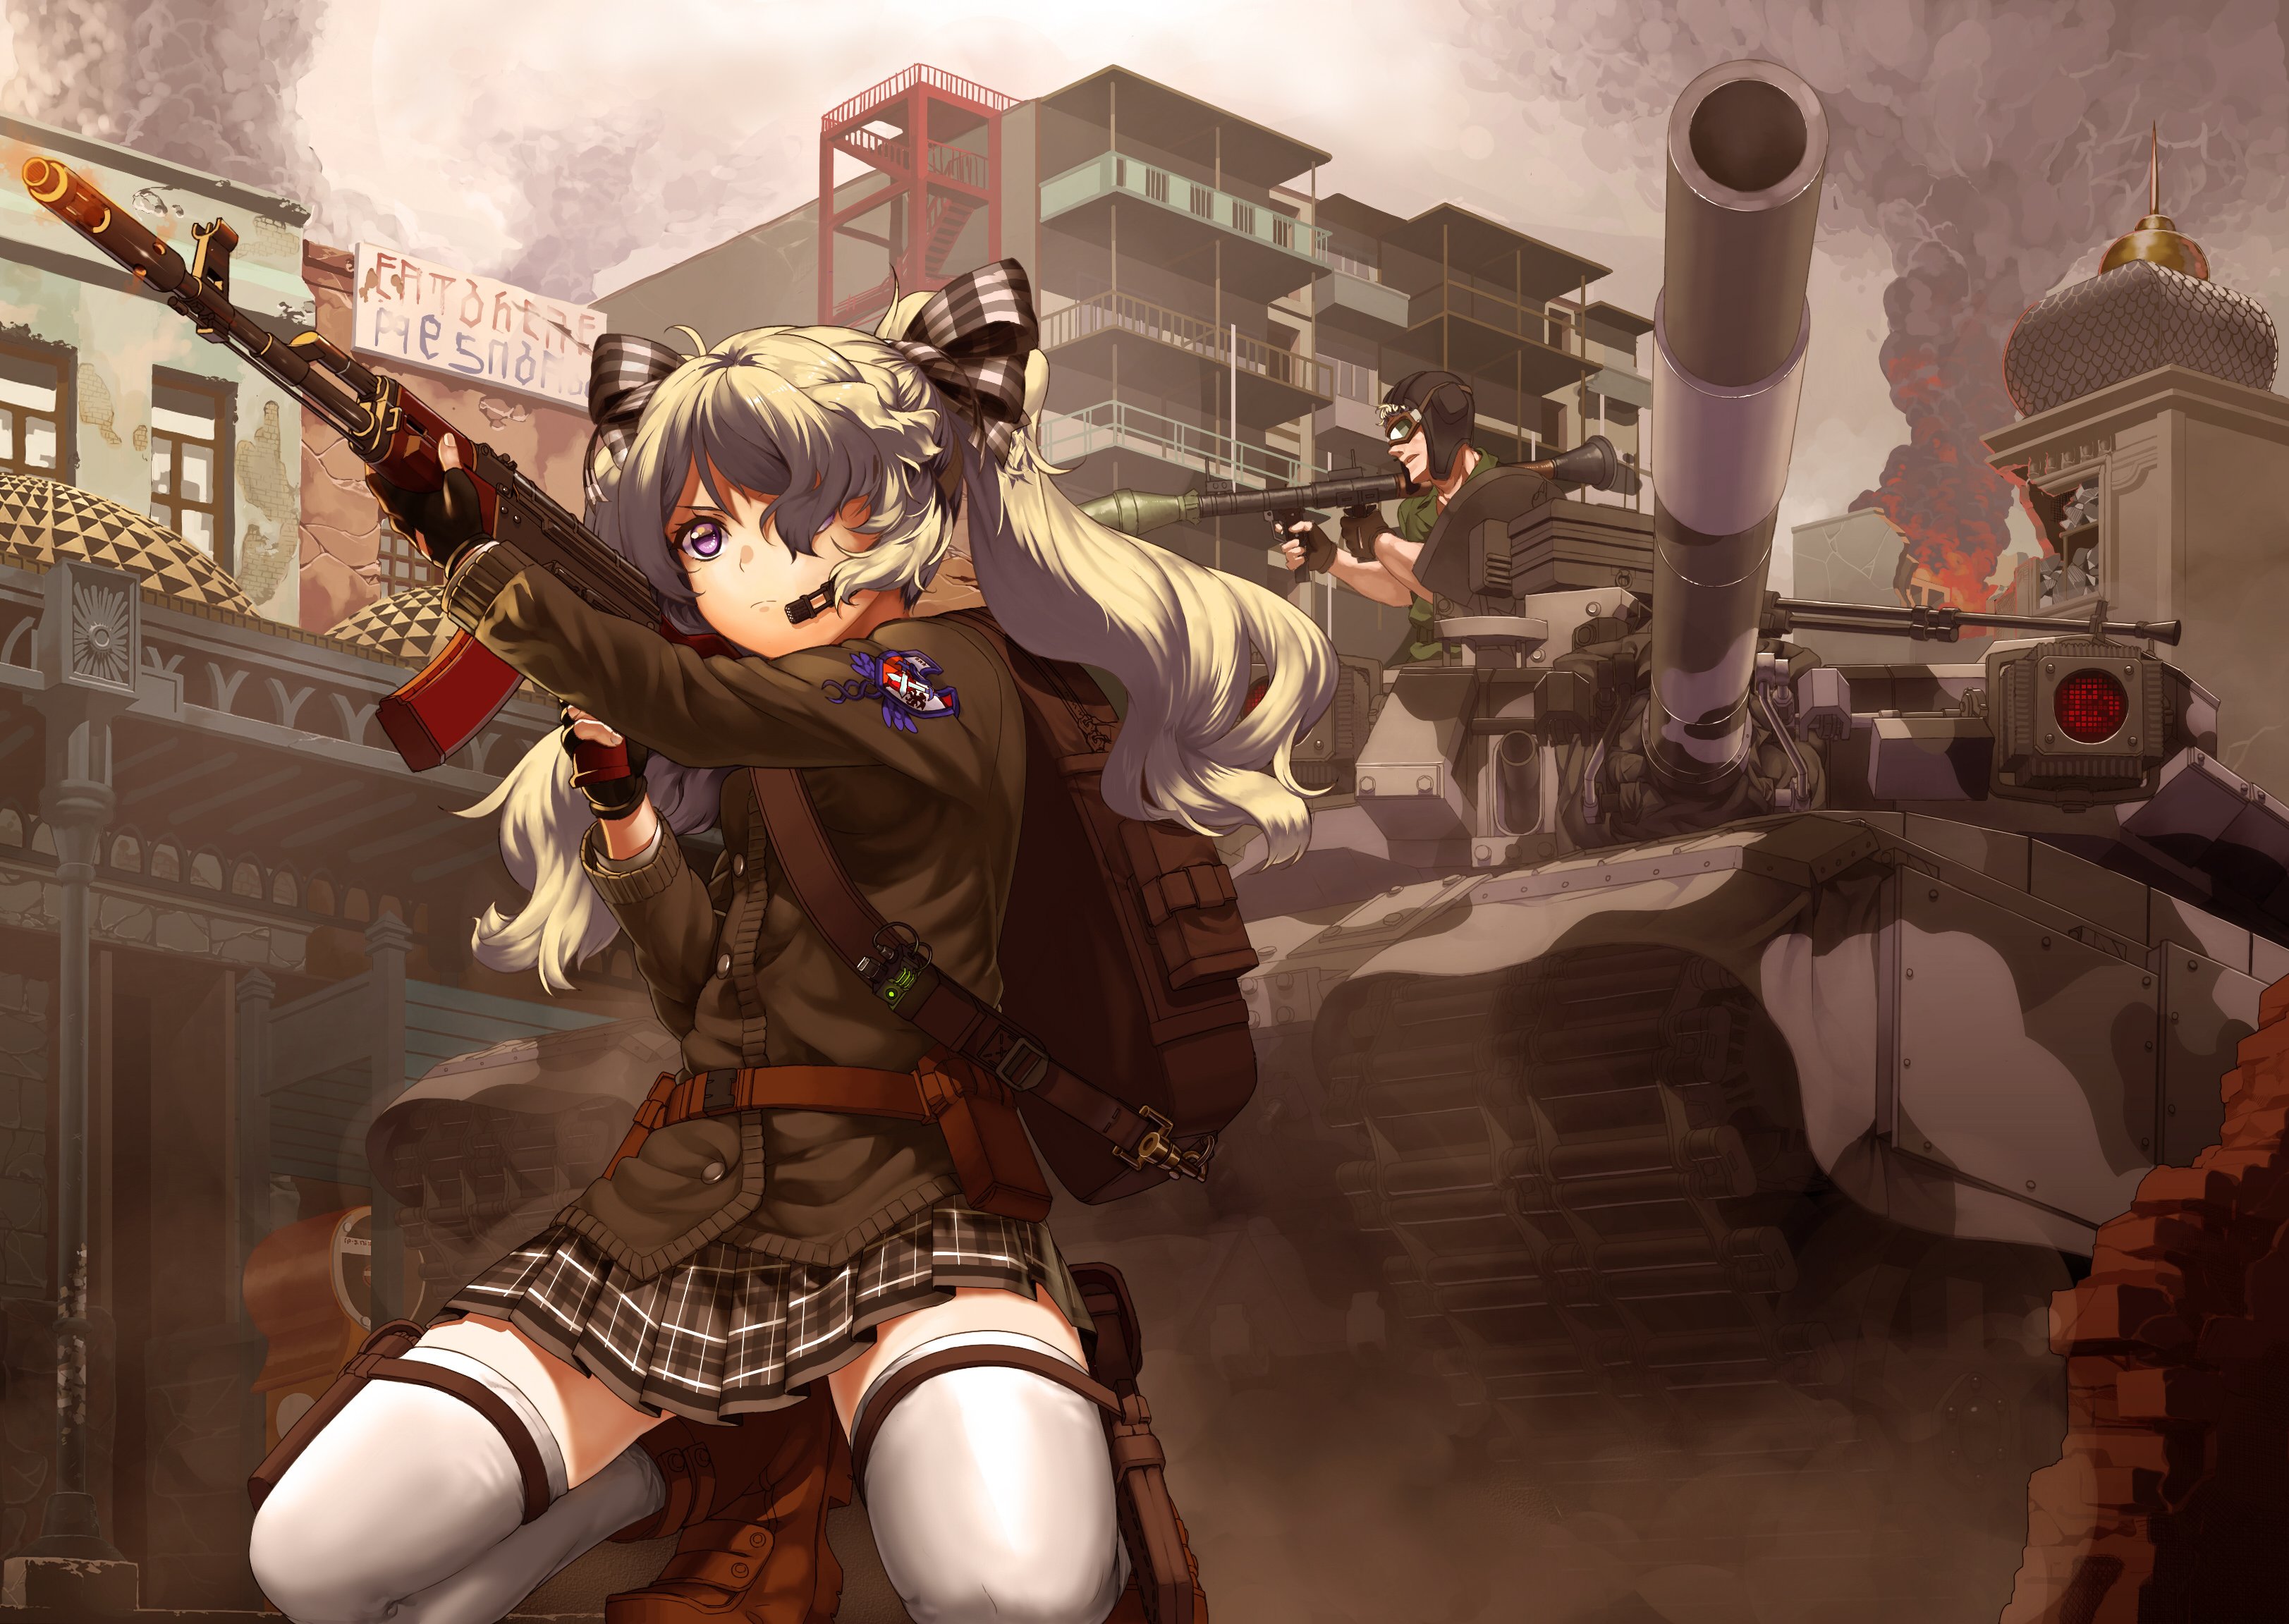 boots, Building, City, Fire, Gloves, Goggles, Gun, Long, Hair, Military, Original, Purple, Eyes, Ribbons, Ruins, Skirt, Thighhighs, Twintails, Uniform, Weapon, White, Hair Wallpaper